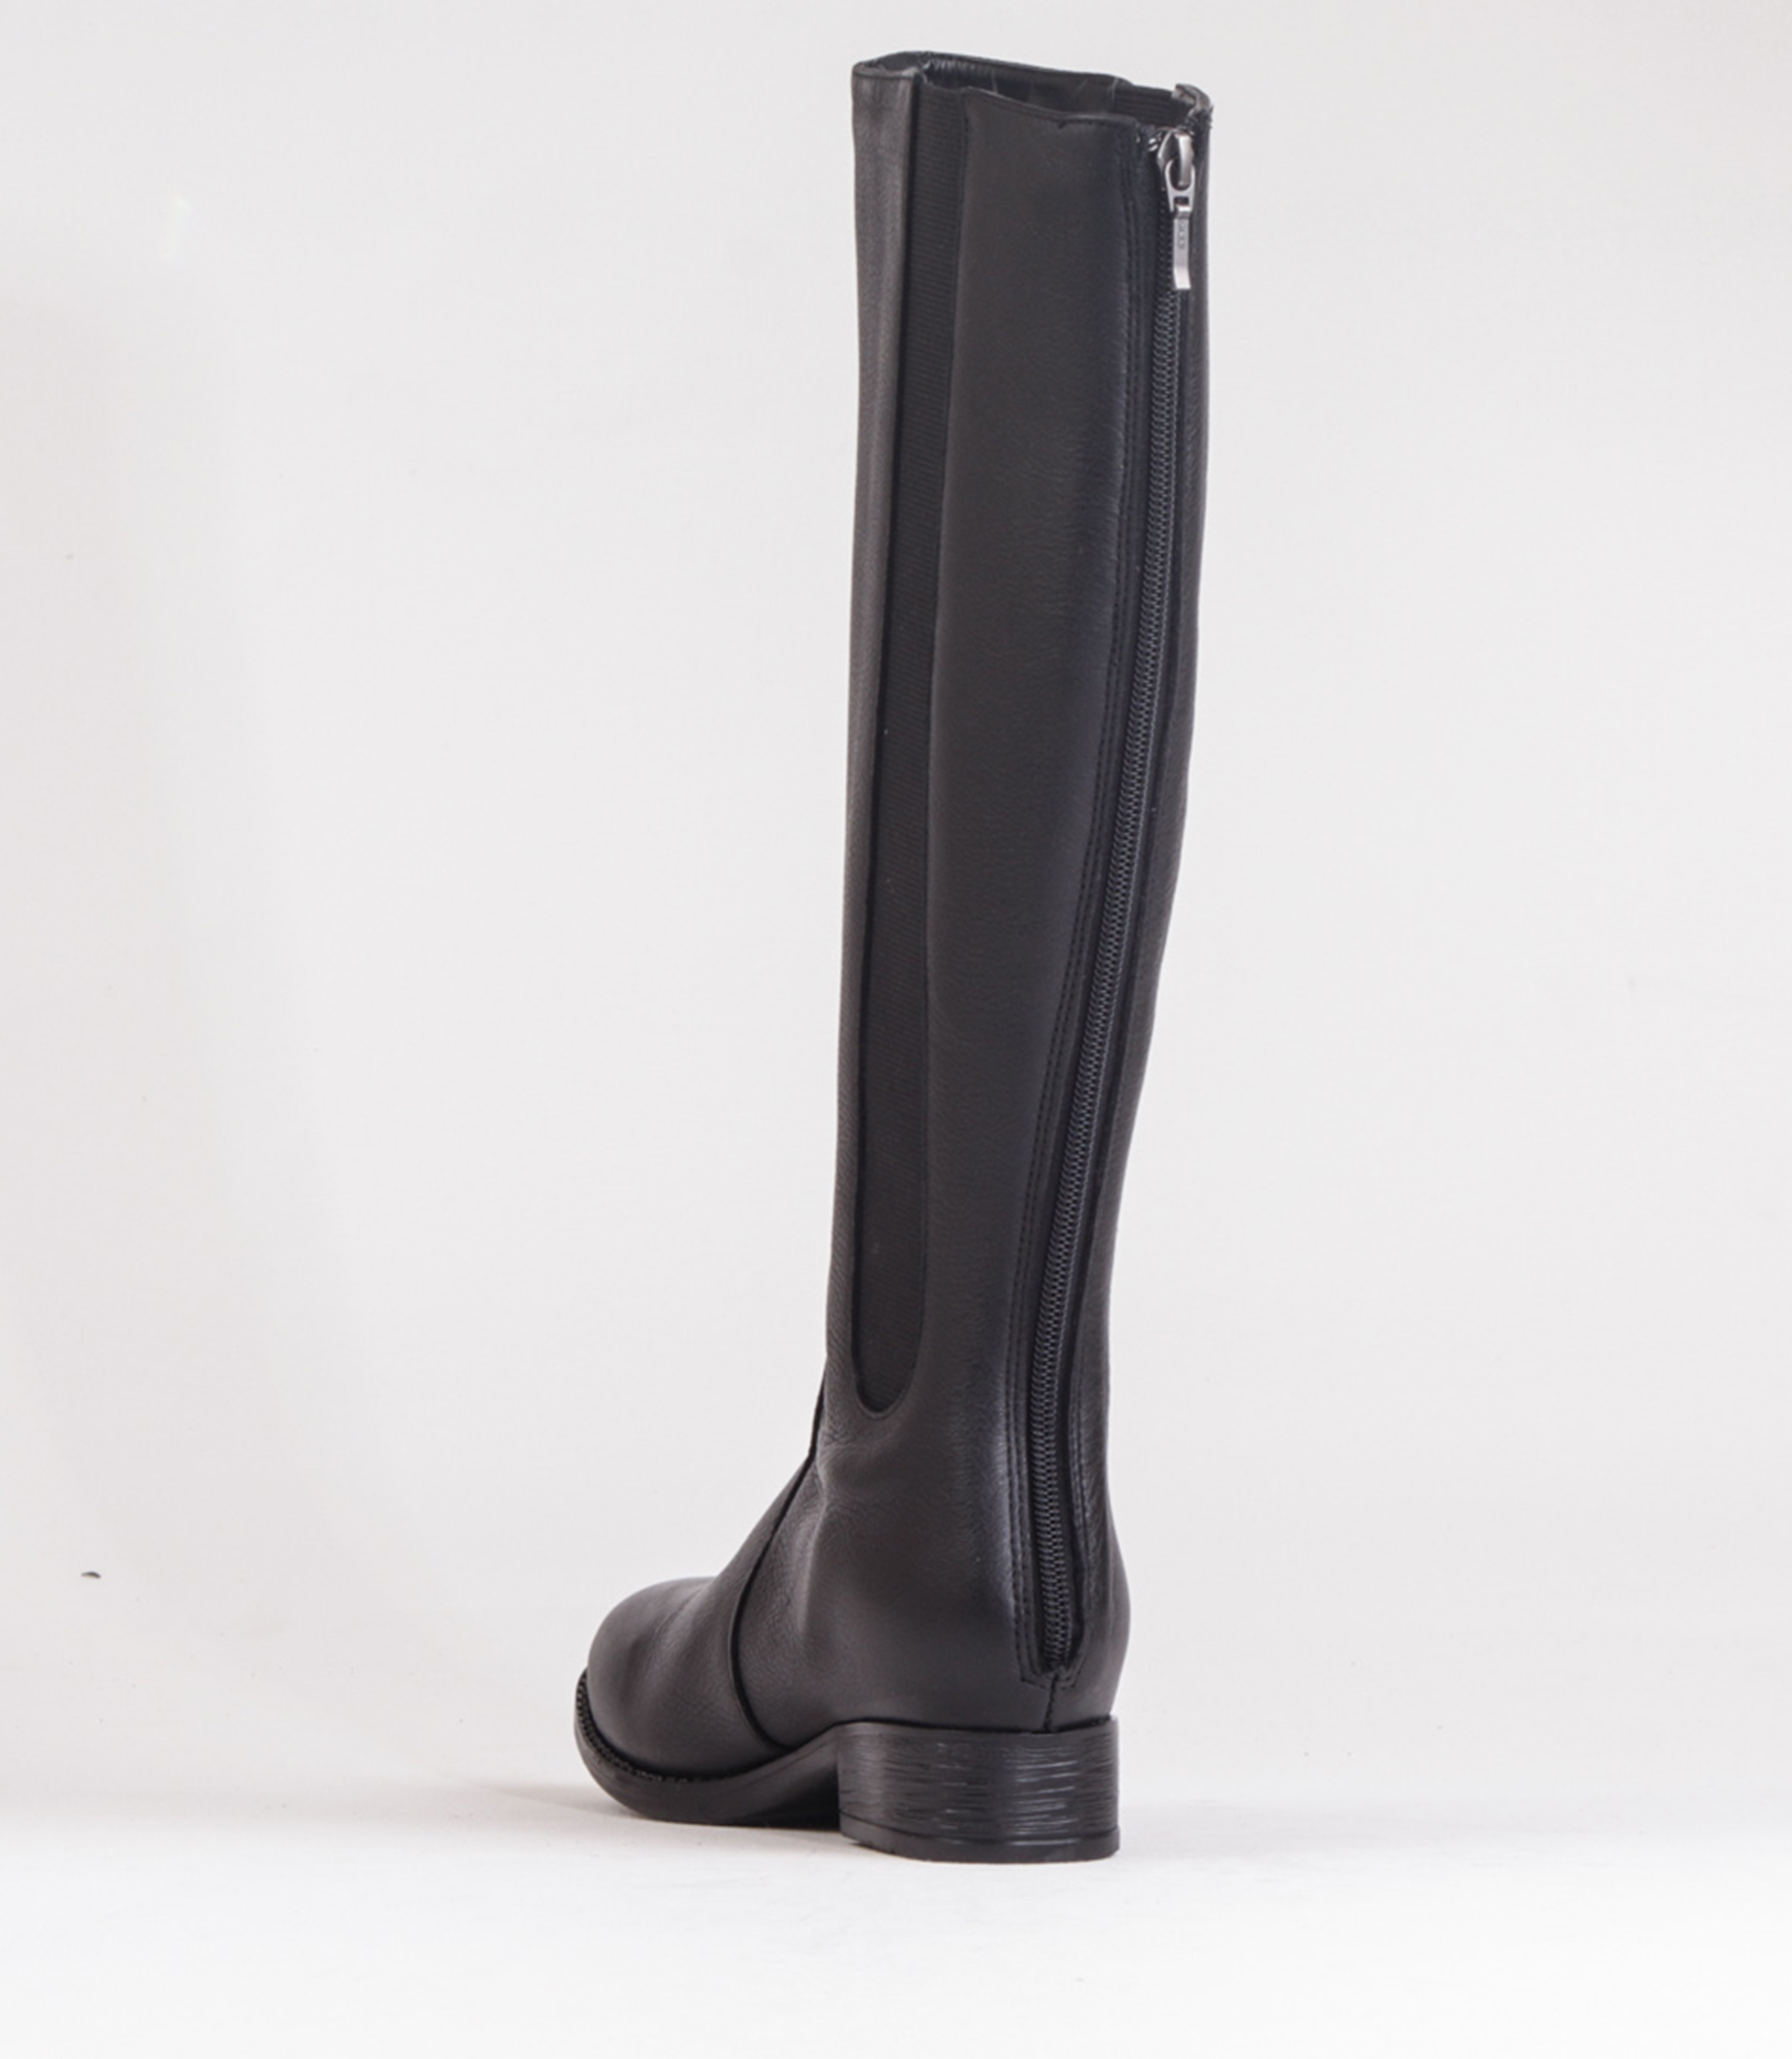 FROGGIE BLACK LEATHER KNEE HIGH BOOT | Rosella - Style inspired by elegance